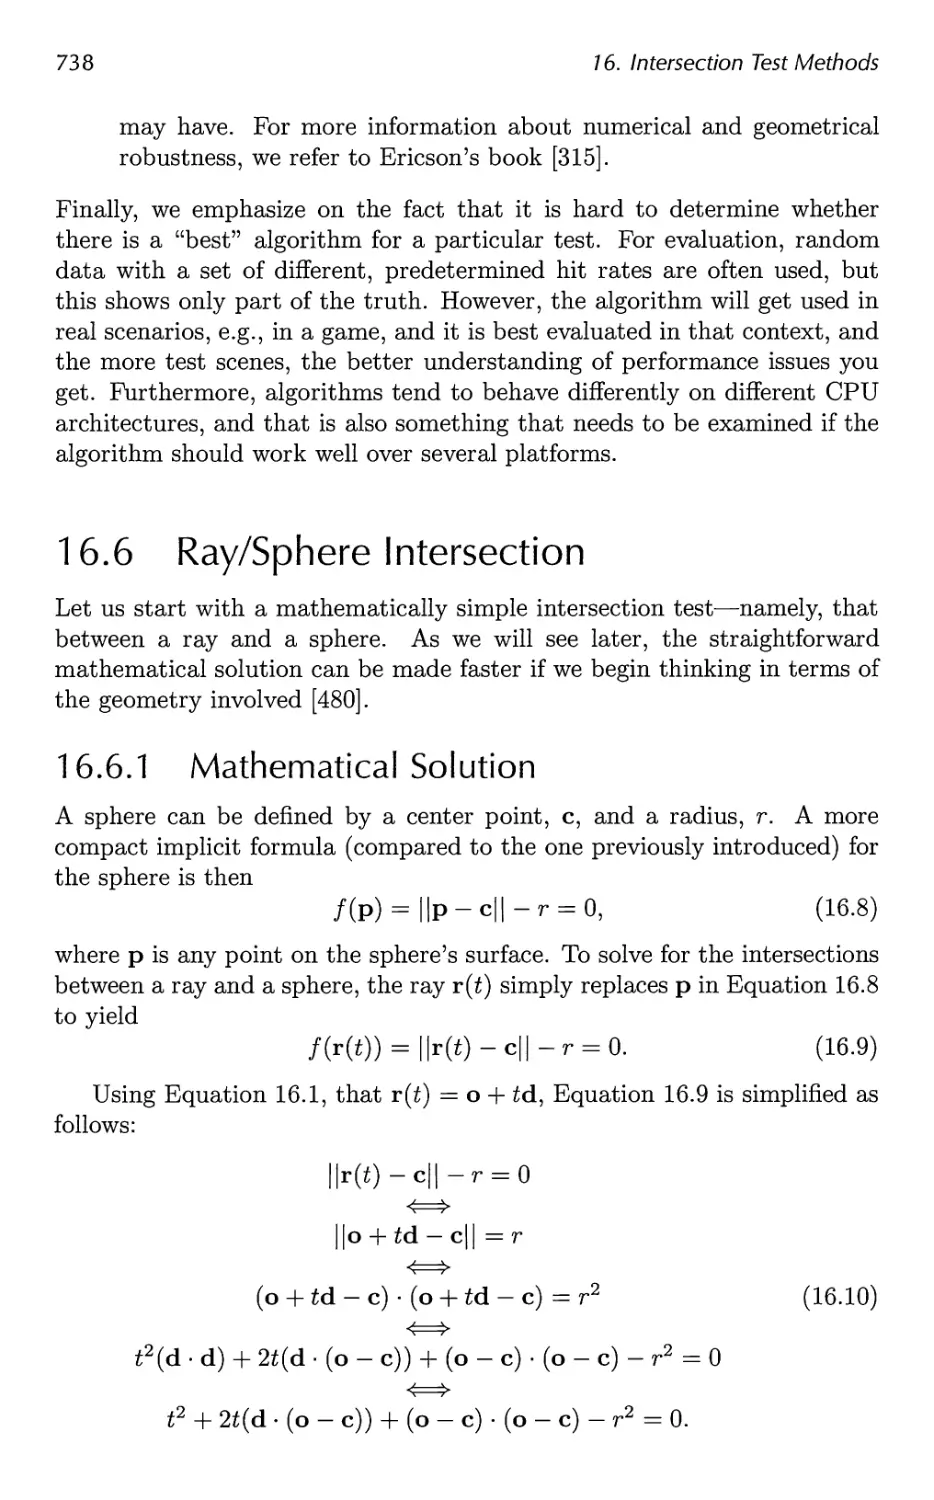 16.6 Ray/Sphere Intersection